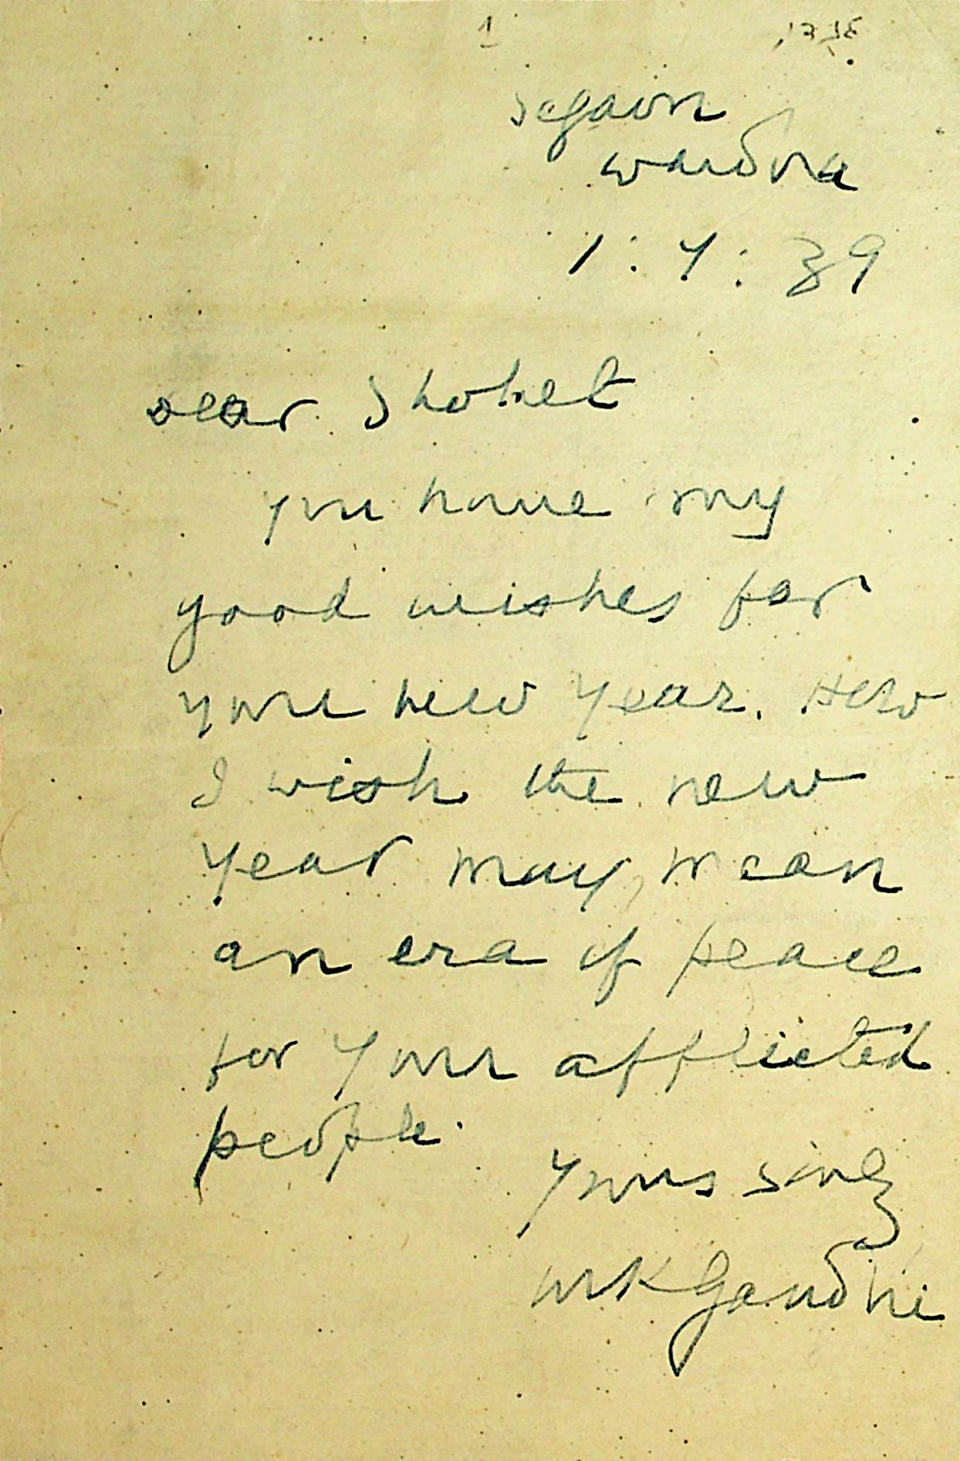 This photo made available by the Abraham Schwadron Collection, National Library of Israel, shows a Jewish New Year greeting written on Sept. 1, 1939 by Mahatma Gandhi to a Jewish official upon the outbreak of World War II. The greeting reads, "Dear Shohet, You have my good wishes for your new year. How I wish the new year may mean an era of peace for your afflicted people. Yours sincerely, MK Gandhi." (Zachary Rothbart/The National Library of Israel via AP)